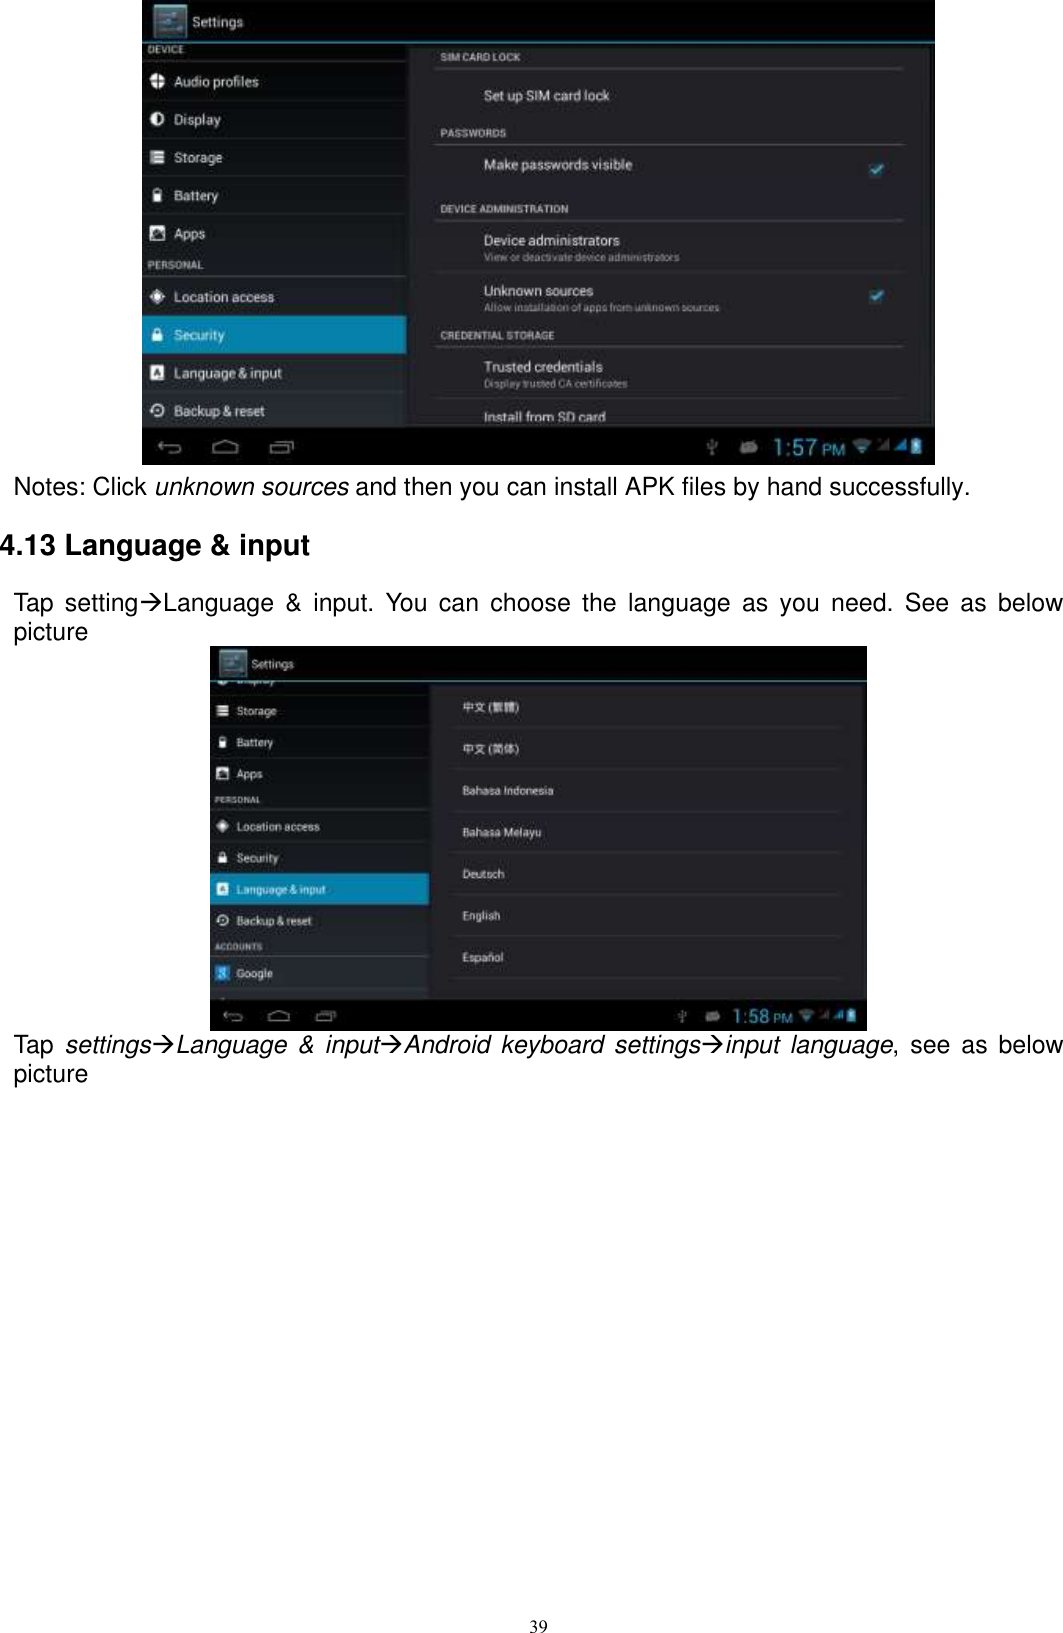      39  Notes: Click unknown sources and then you can install APK files by hand successfully.   4.13 Language &amp; input Tap  settingLanguage  &amp;  input.  You  can  choose  the  language  as  you  need.  See  as  below picture  Tap  settingsLanguage &amp;  inputAndroid  keyboard settingsinput  language, see  as  below picture 